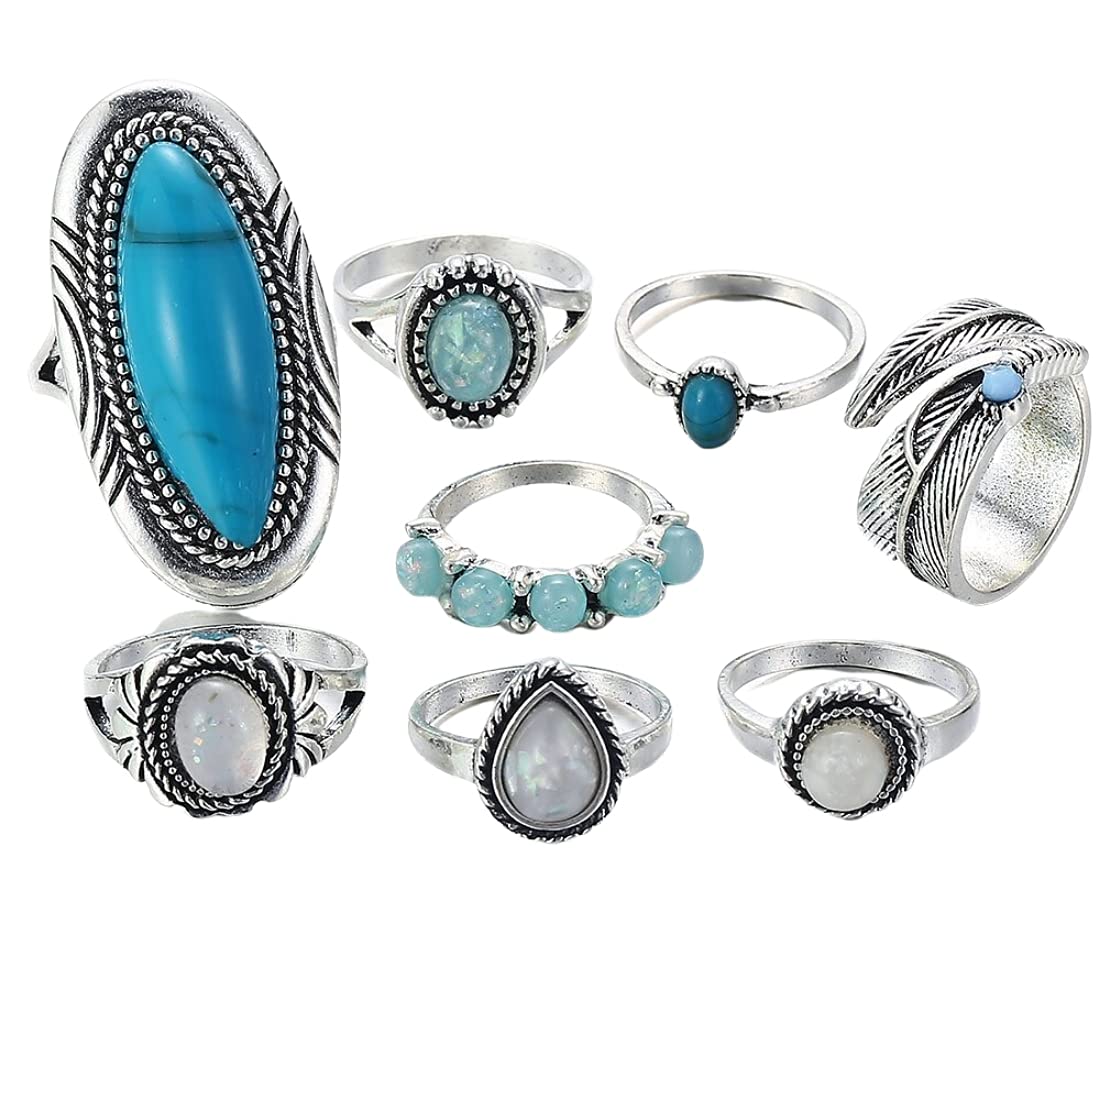 Yellow Chimes Rings for Women 8 Pcs Rings Set Turquoise Stone Vintage Style Midi Finger Silver Oxidised Knuckle Rings Set for Women and Girls.